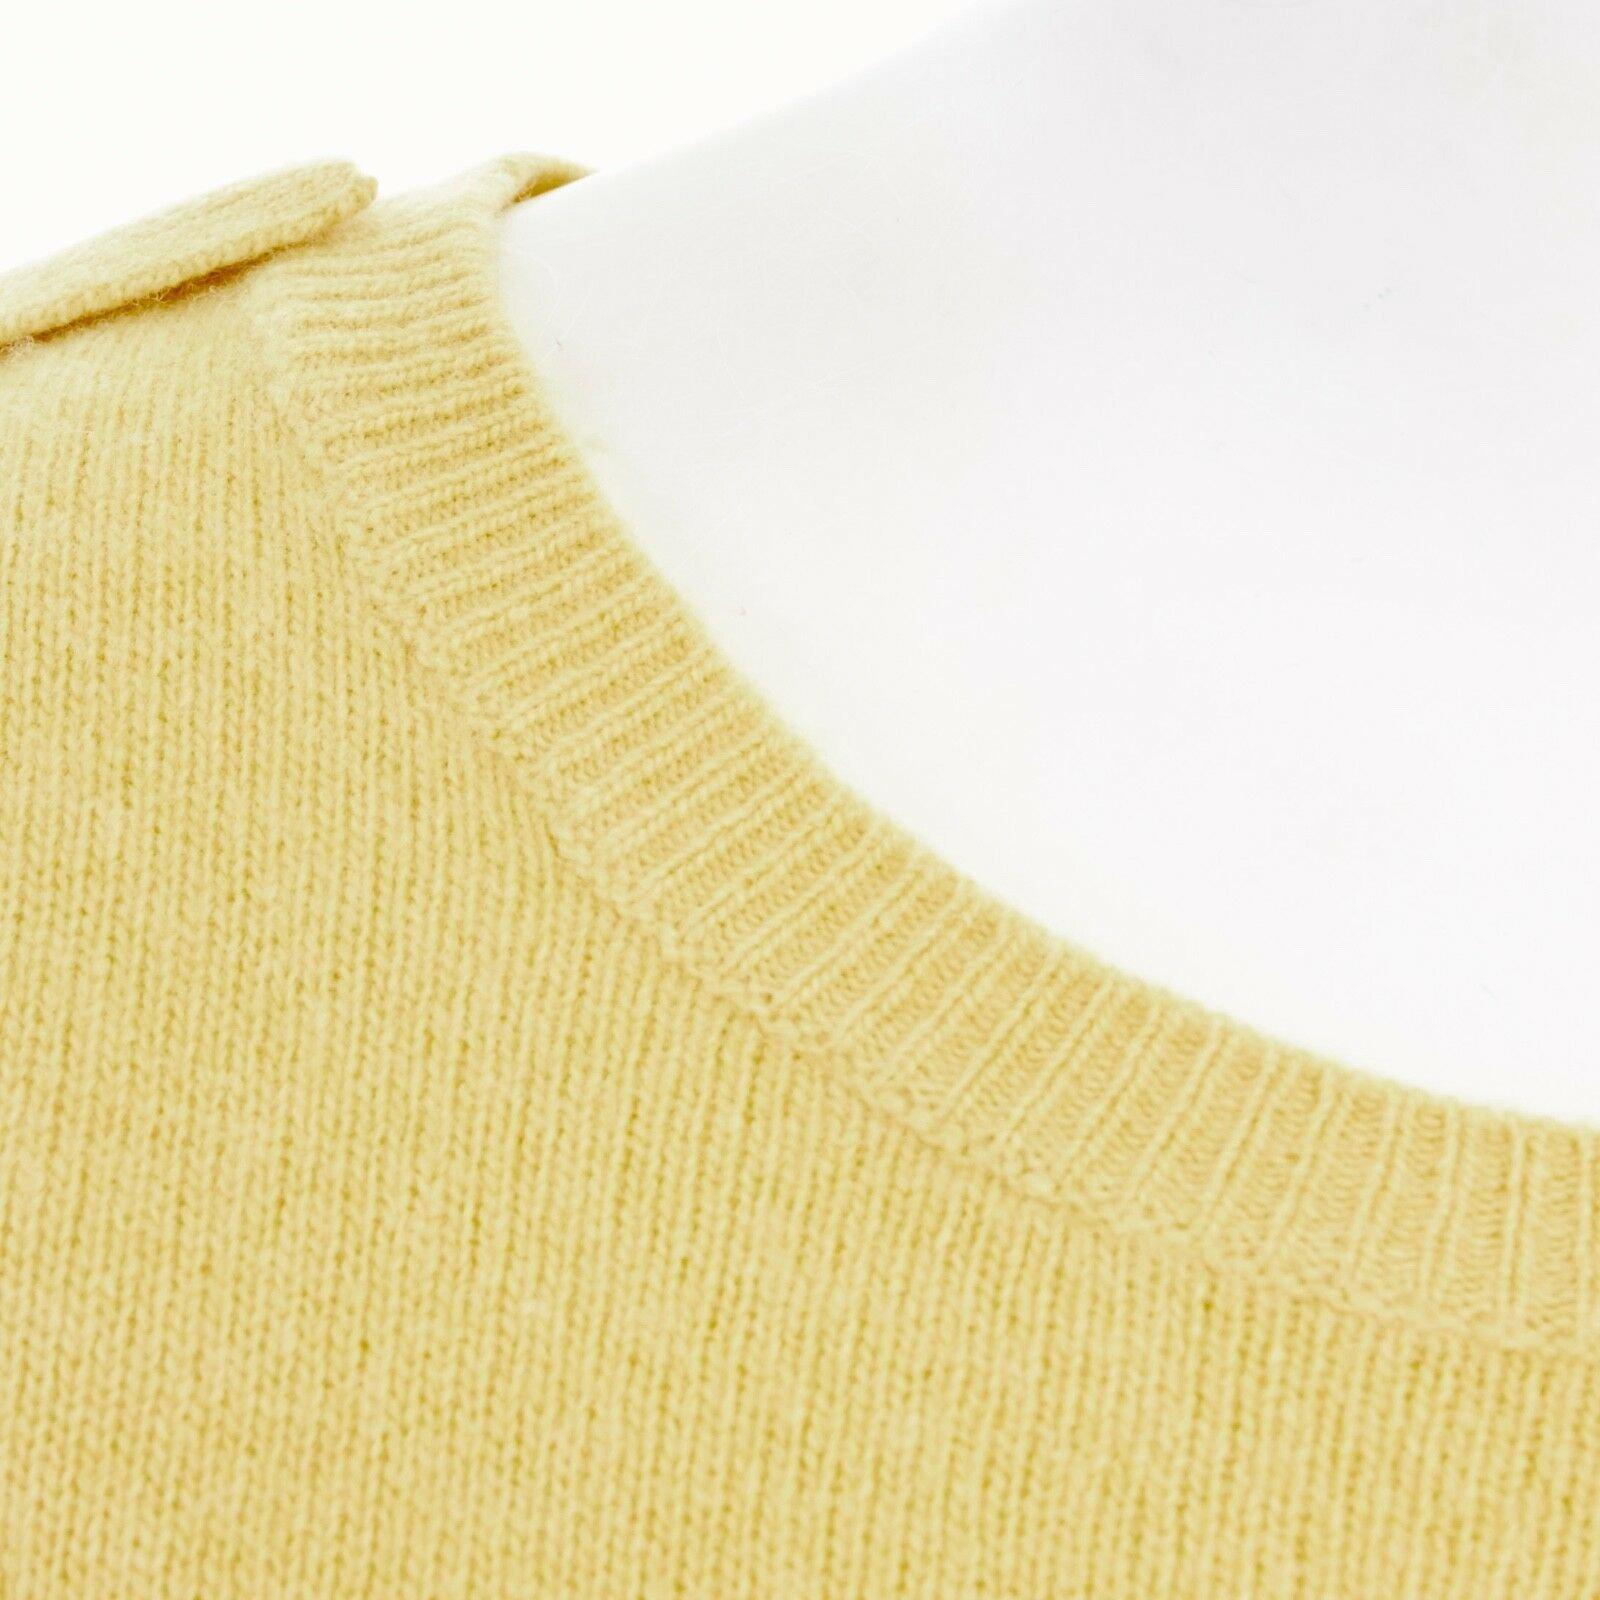 MAX & CO. MAX MARA 100% wool canary yellow patch pocket sweater top S 2